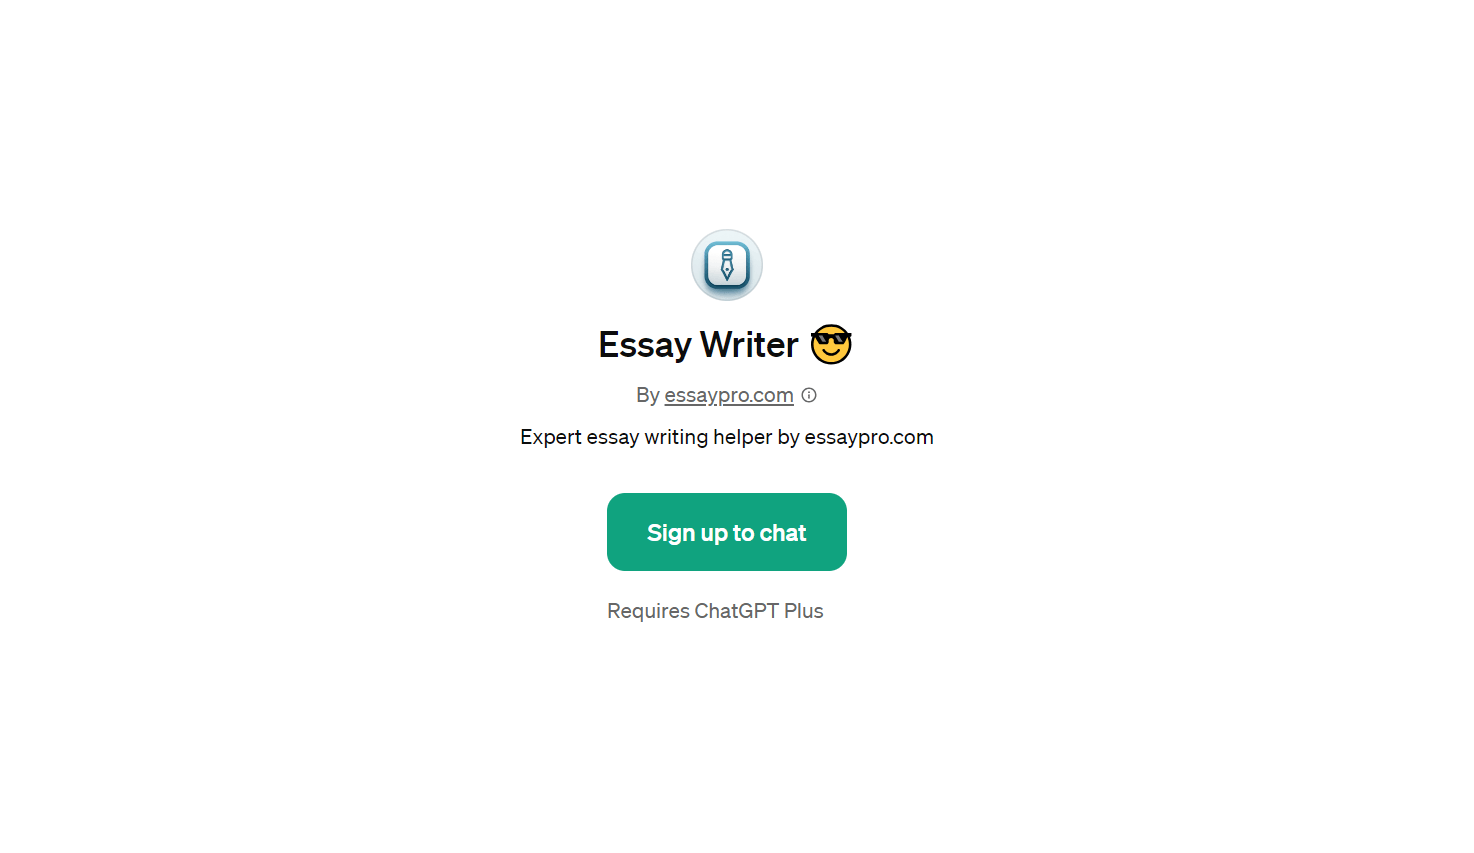 Essay Writer - Get Engaging and Informative Essays 